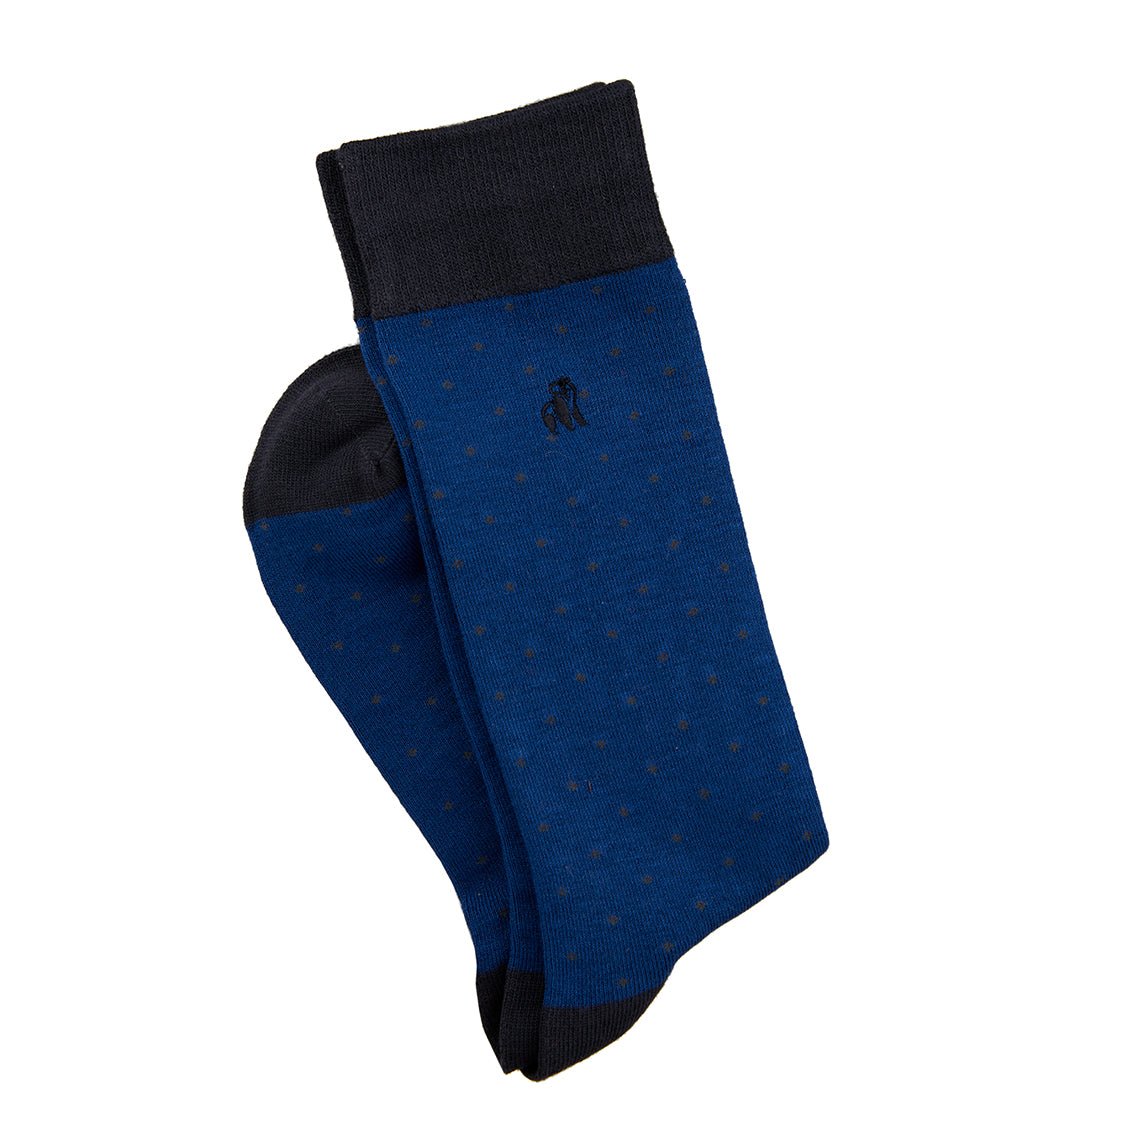 Bamboo Socks - Spotted Royal Blue - Life of Riley